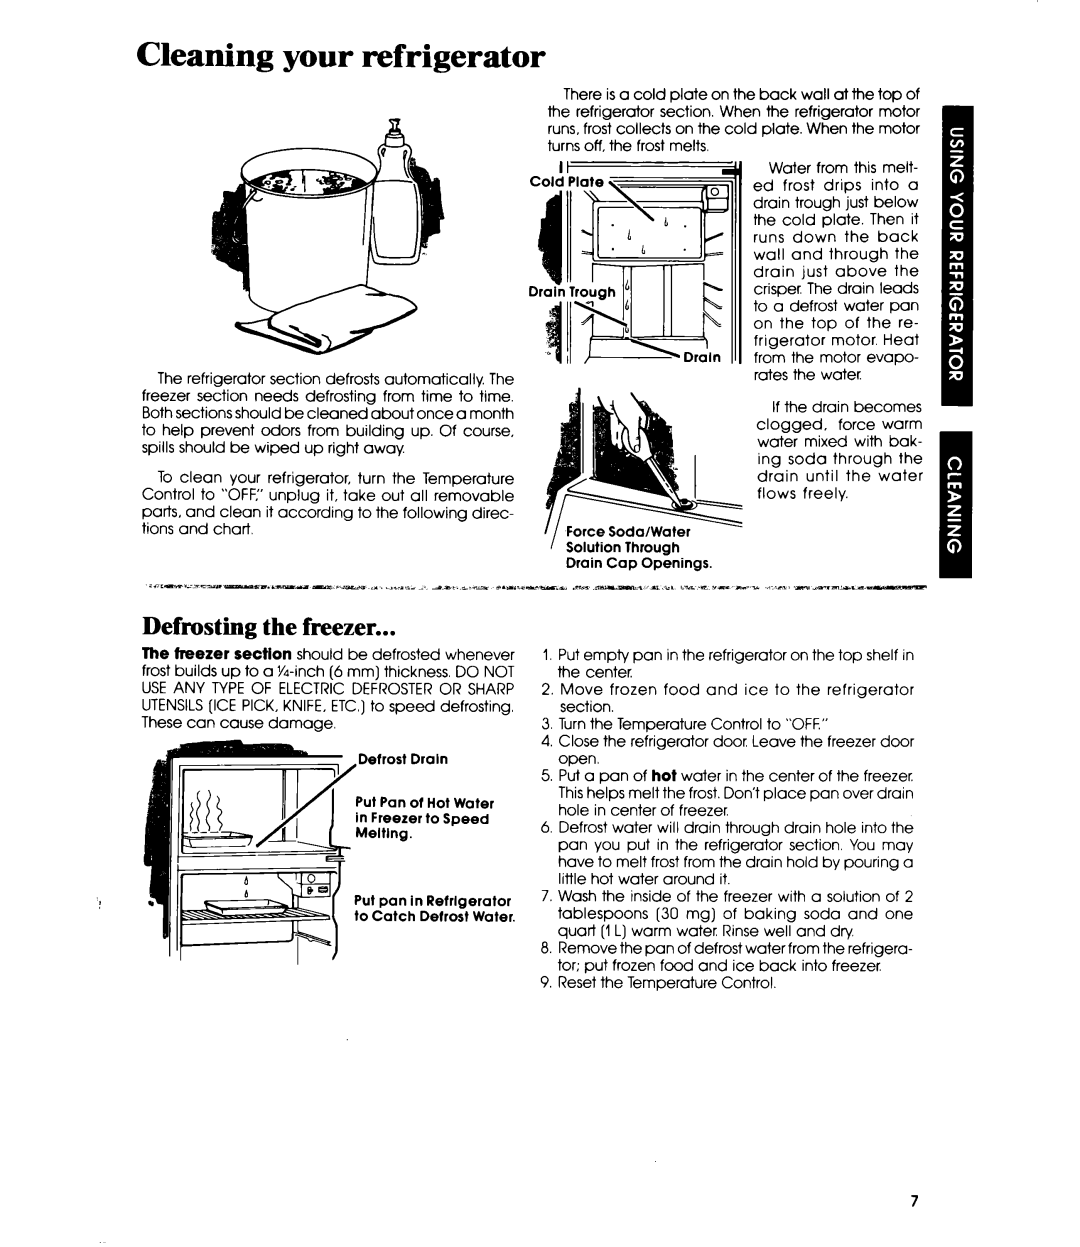 Whirlpool ET12PC manual Cleaning your refrigerator, Defrosting the freezer 